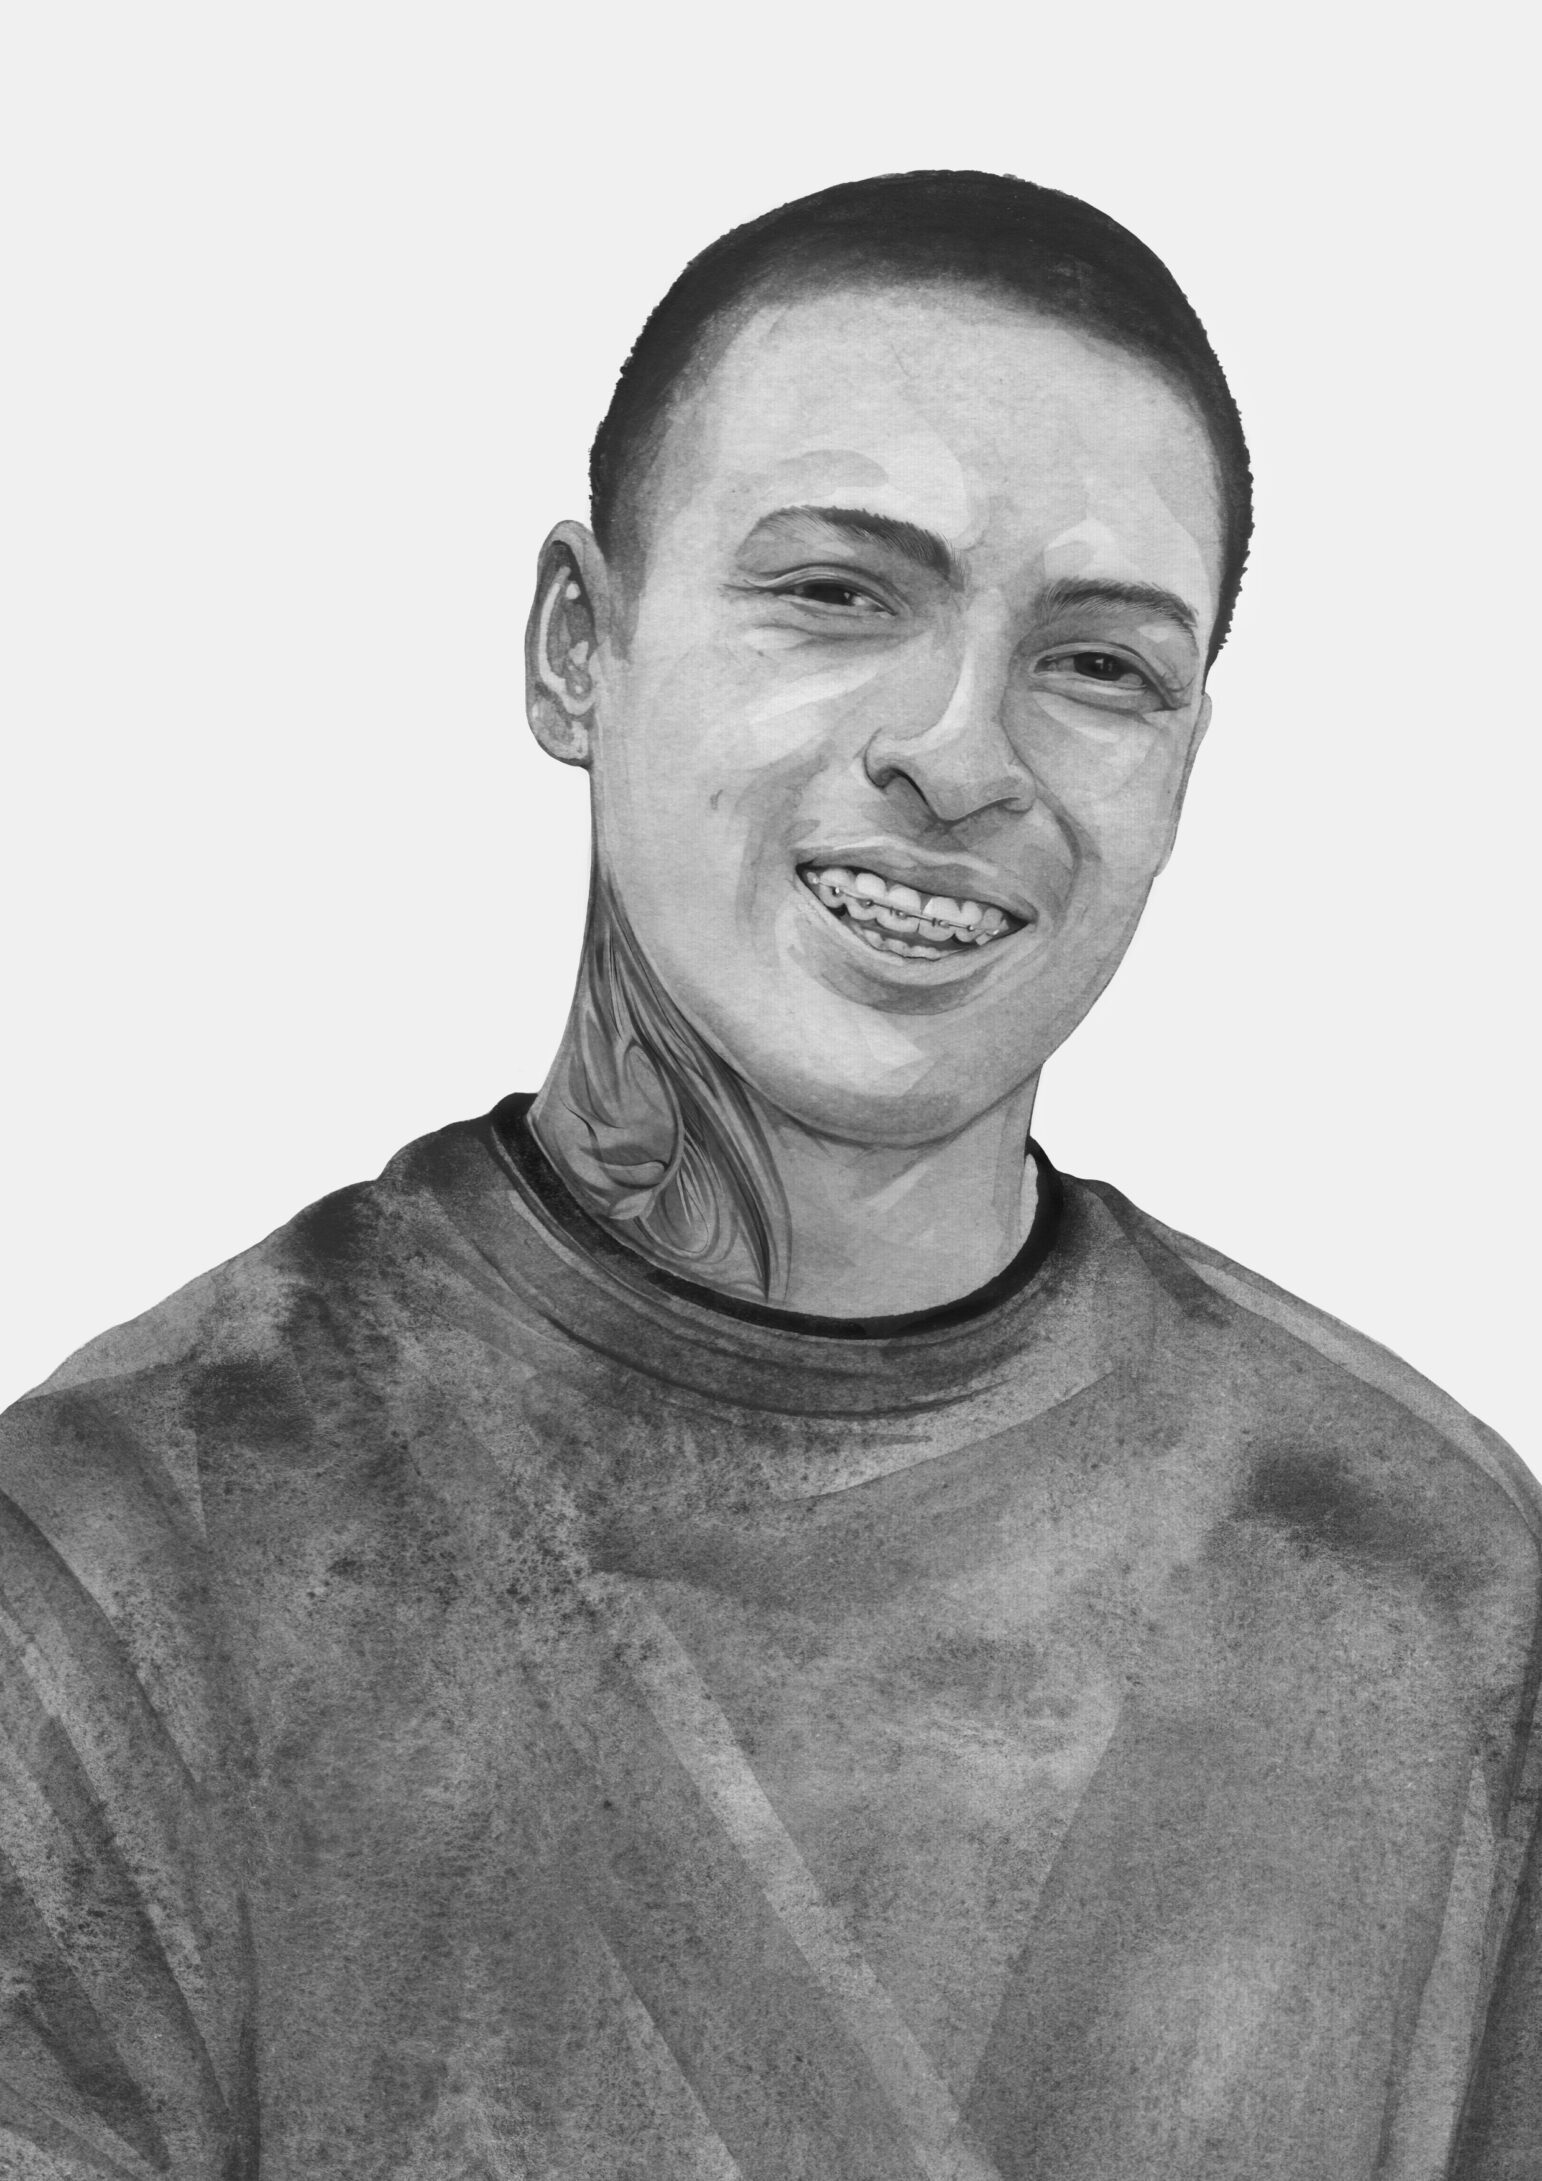 An illustrated, grayscale portrait of a 22-year old Latino man with braces smiling warmly. He has short-cropped hair and a geometric tattoo on the right side of his neck.